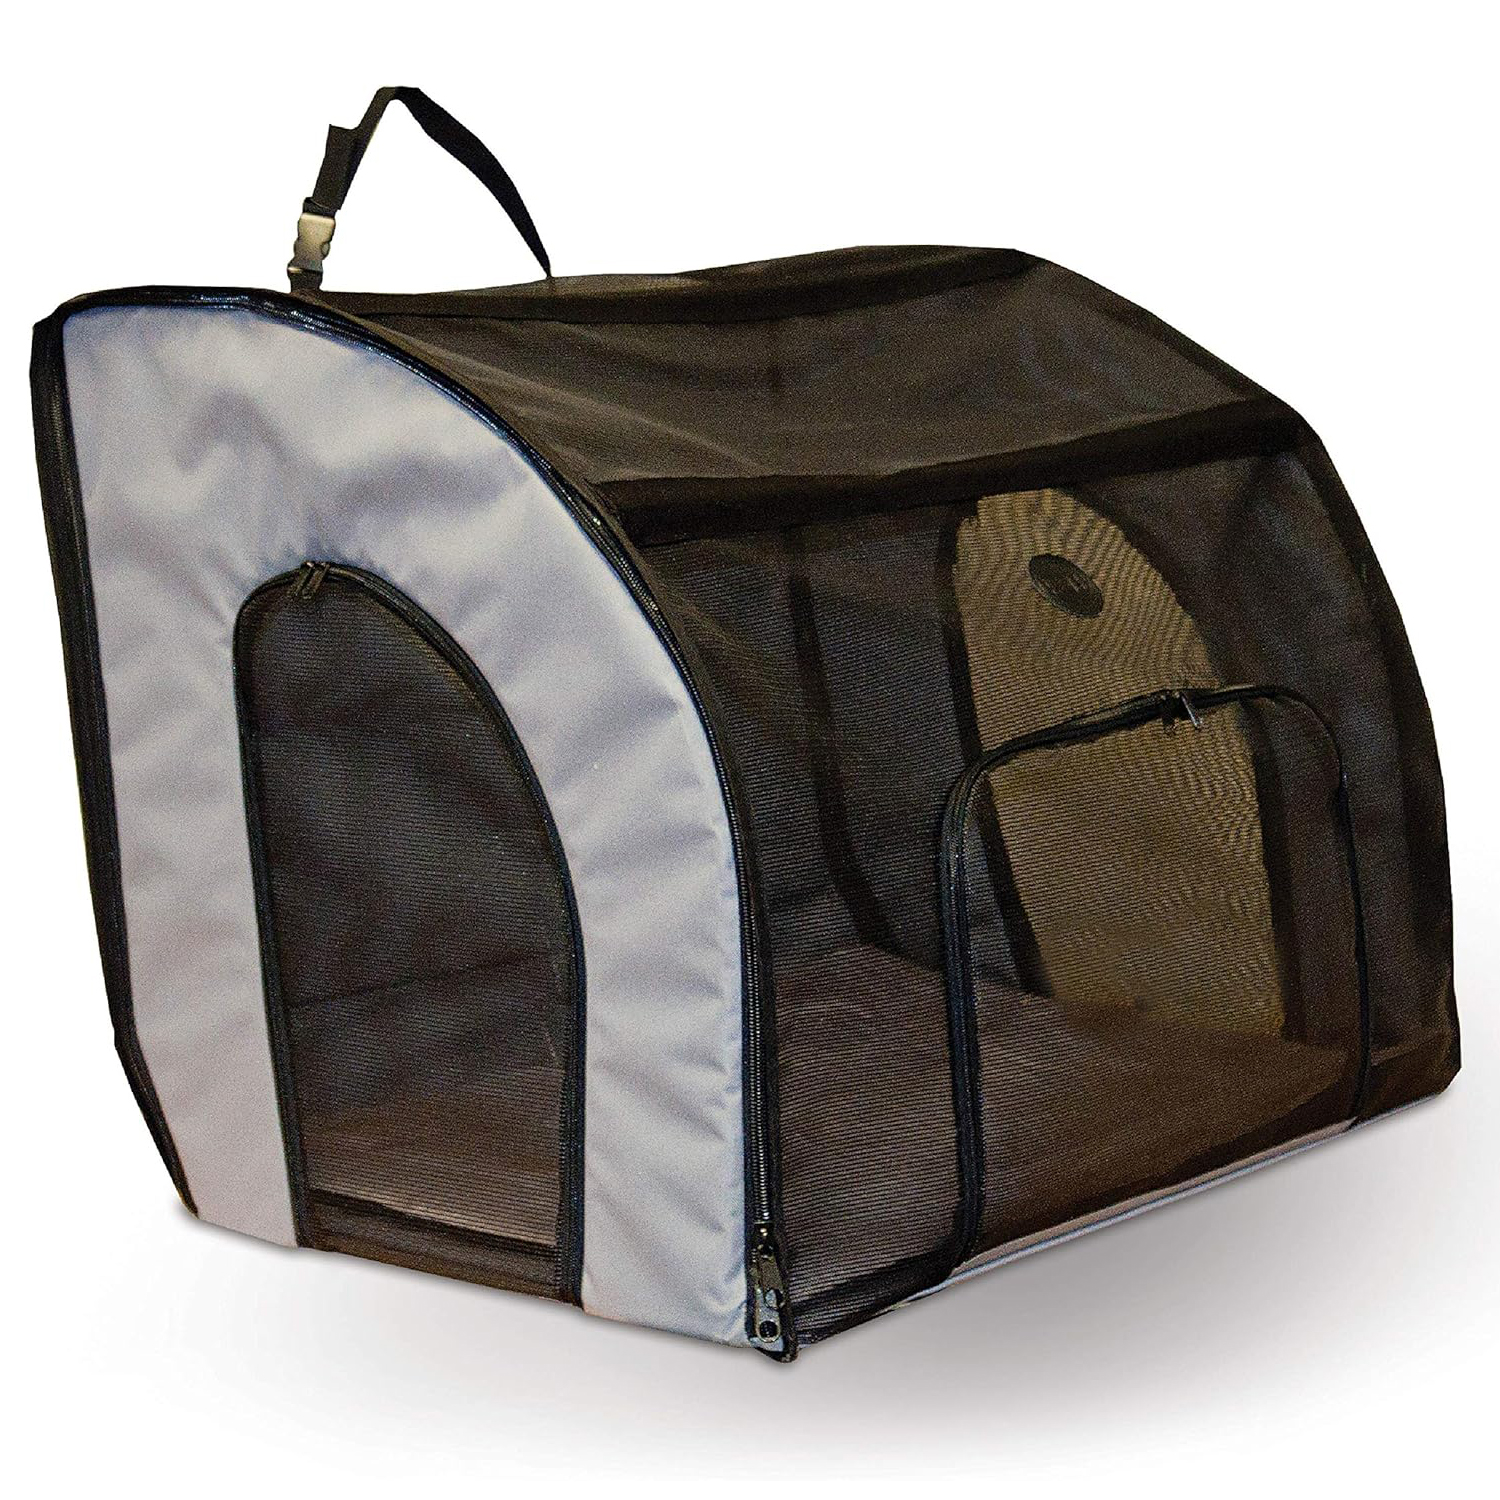 K&H Pet Products Travel Safety Carrier for Pets